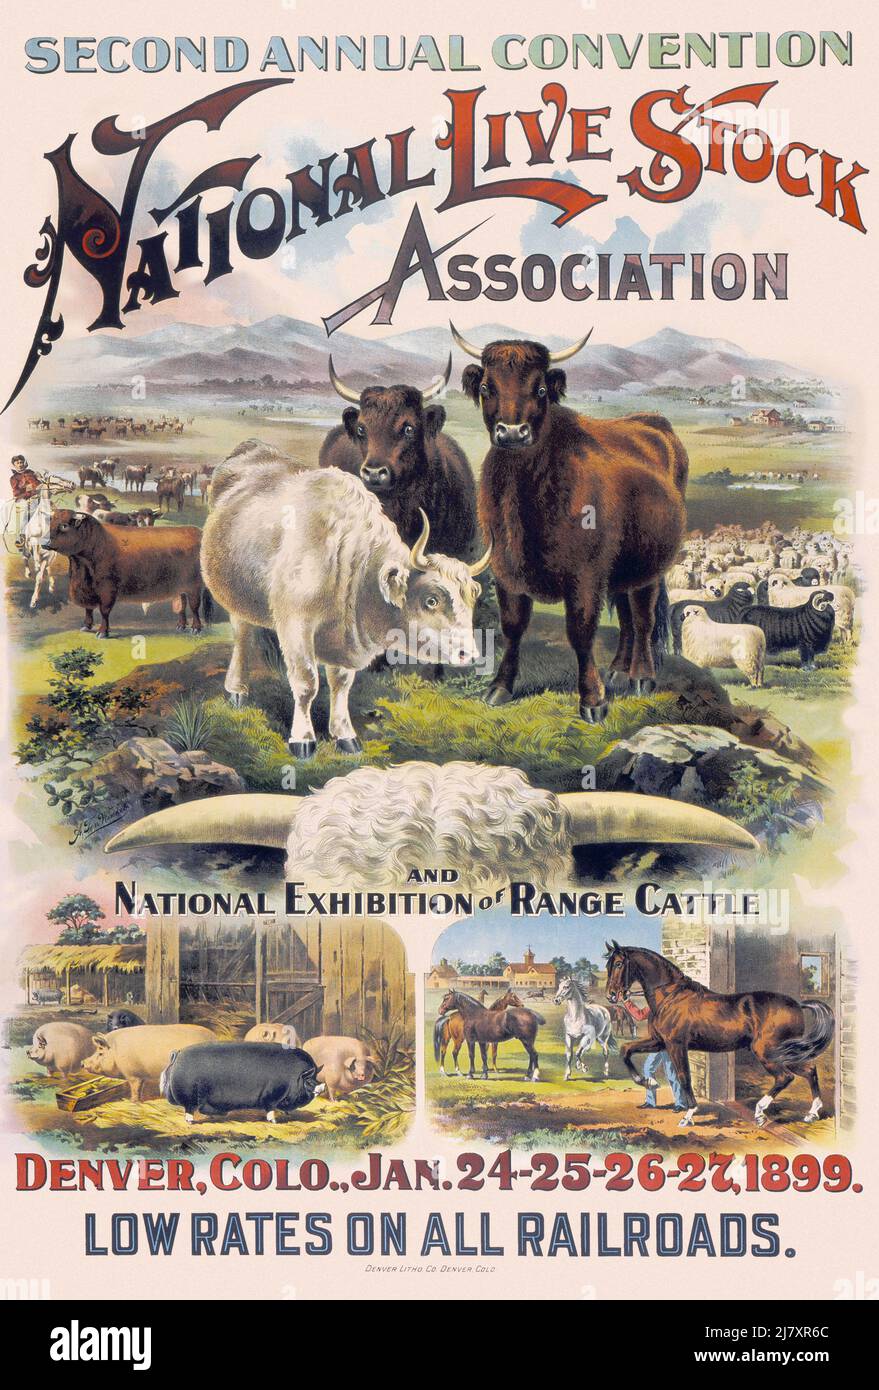 National Live Stock Association Convention Stock Photo